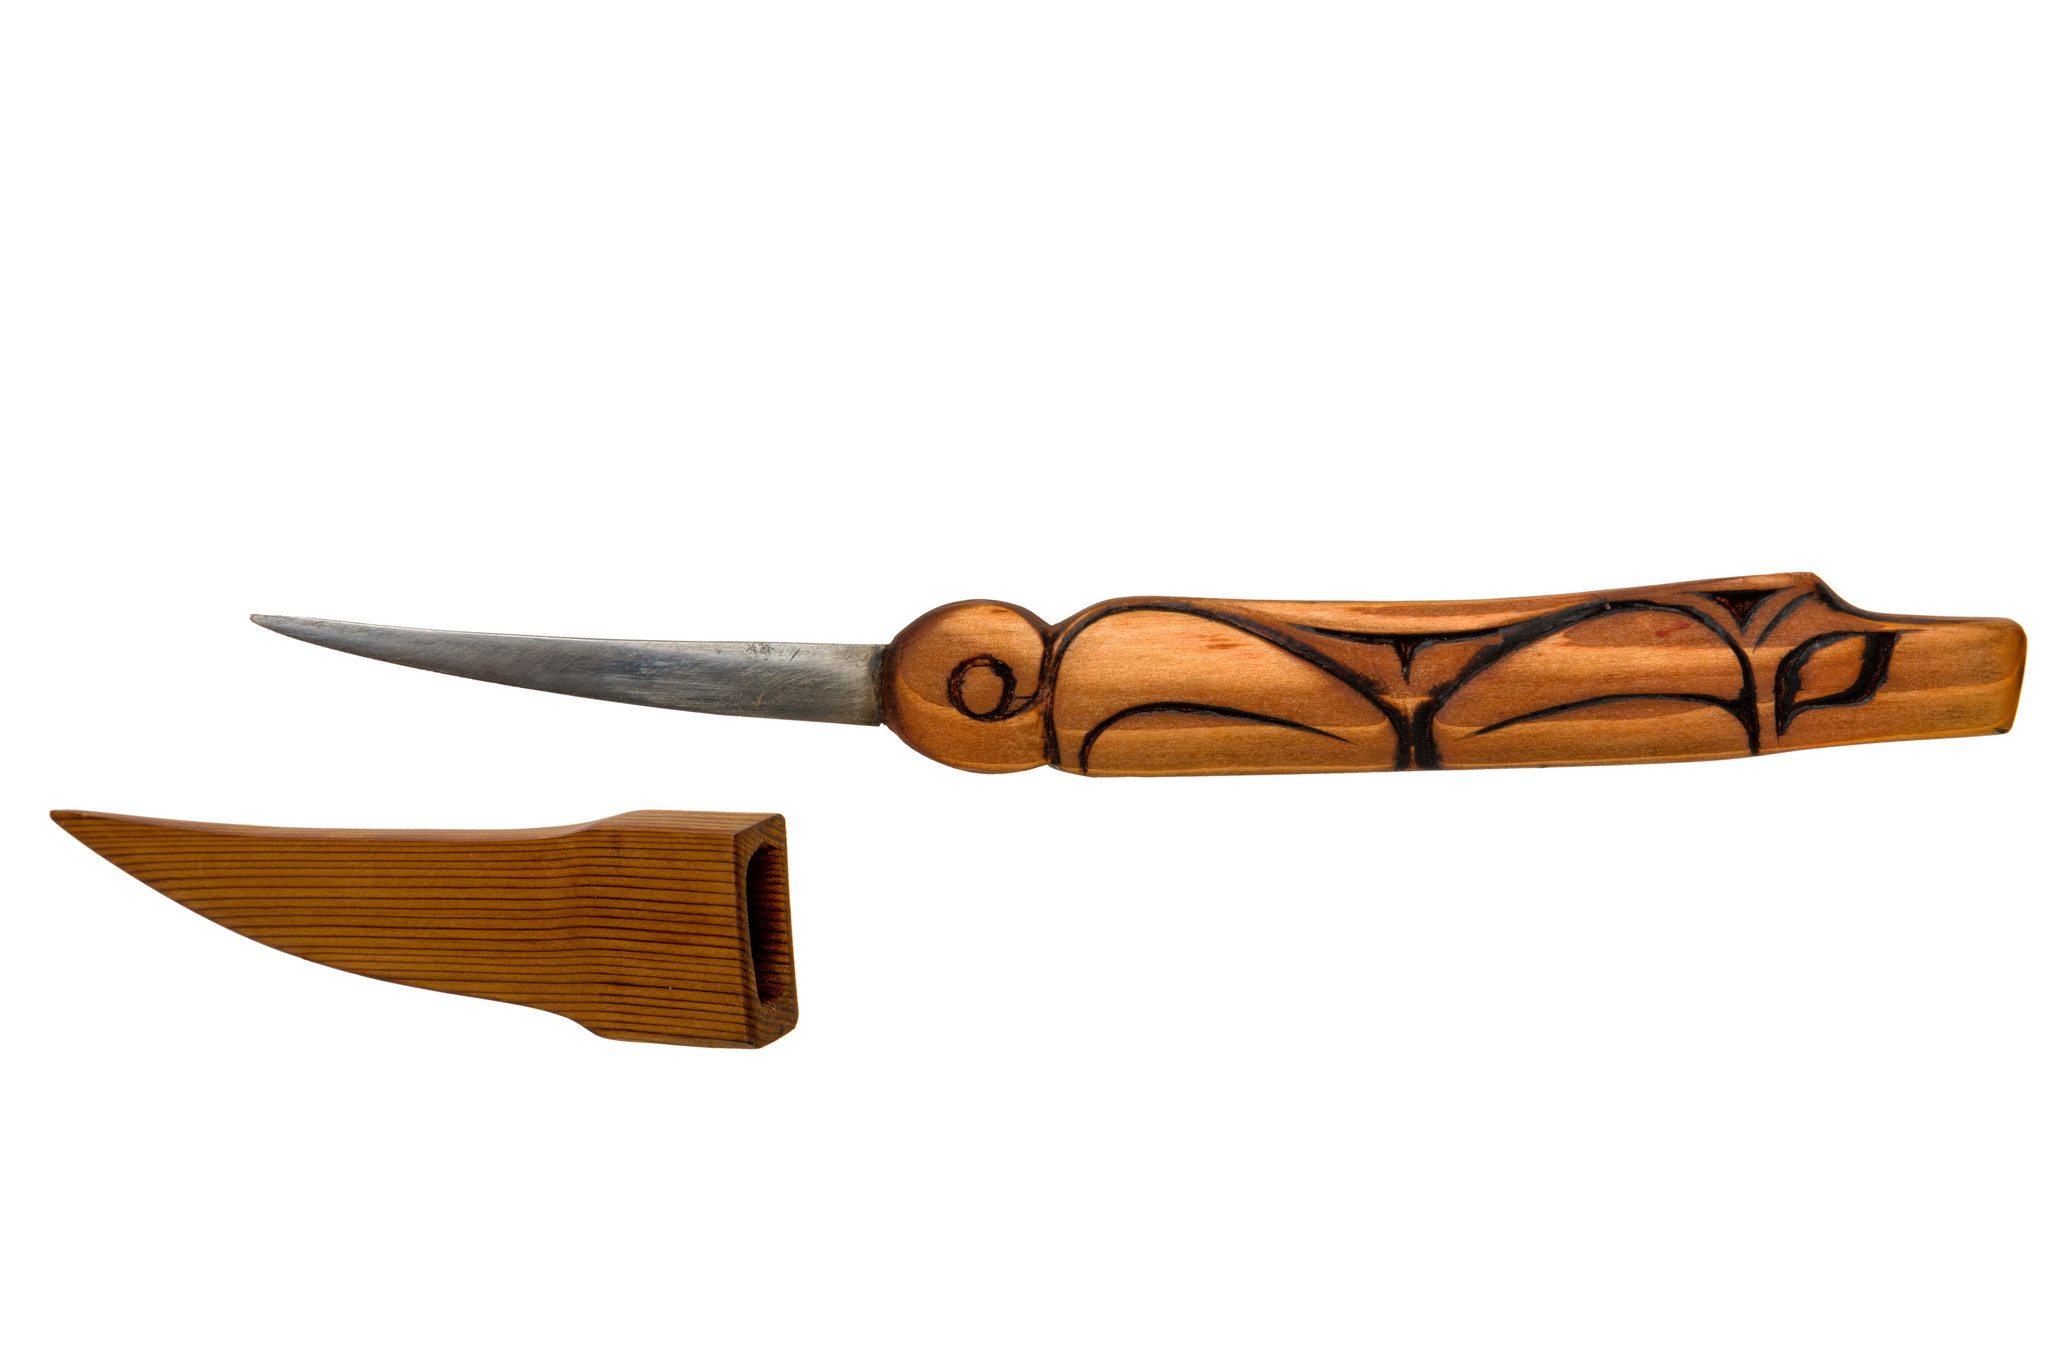 Knife with Carved Wolf Handle and Carved Sheath